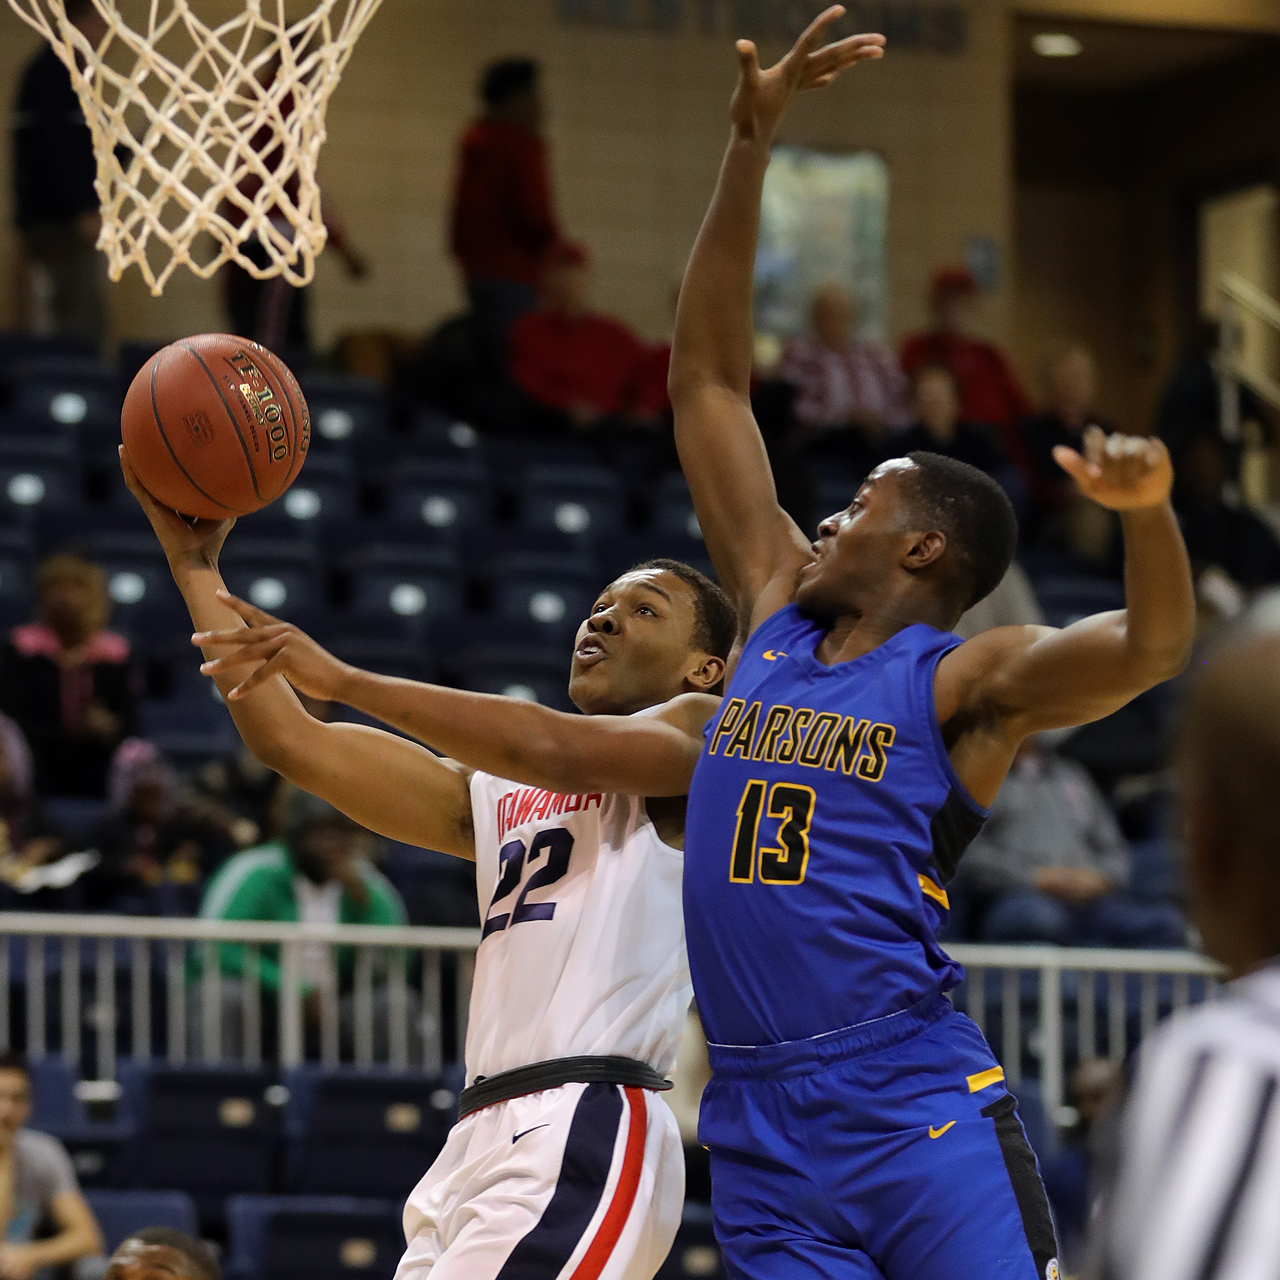 Indians drop tight battle to Snead State 60-57